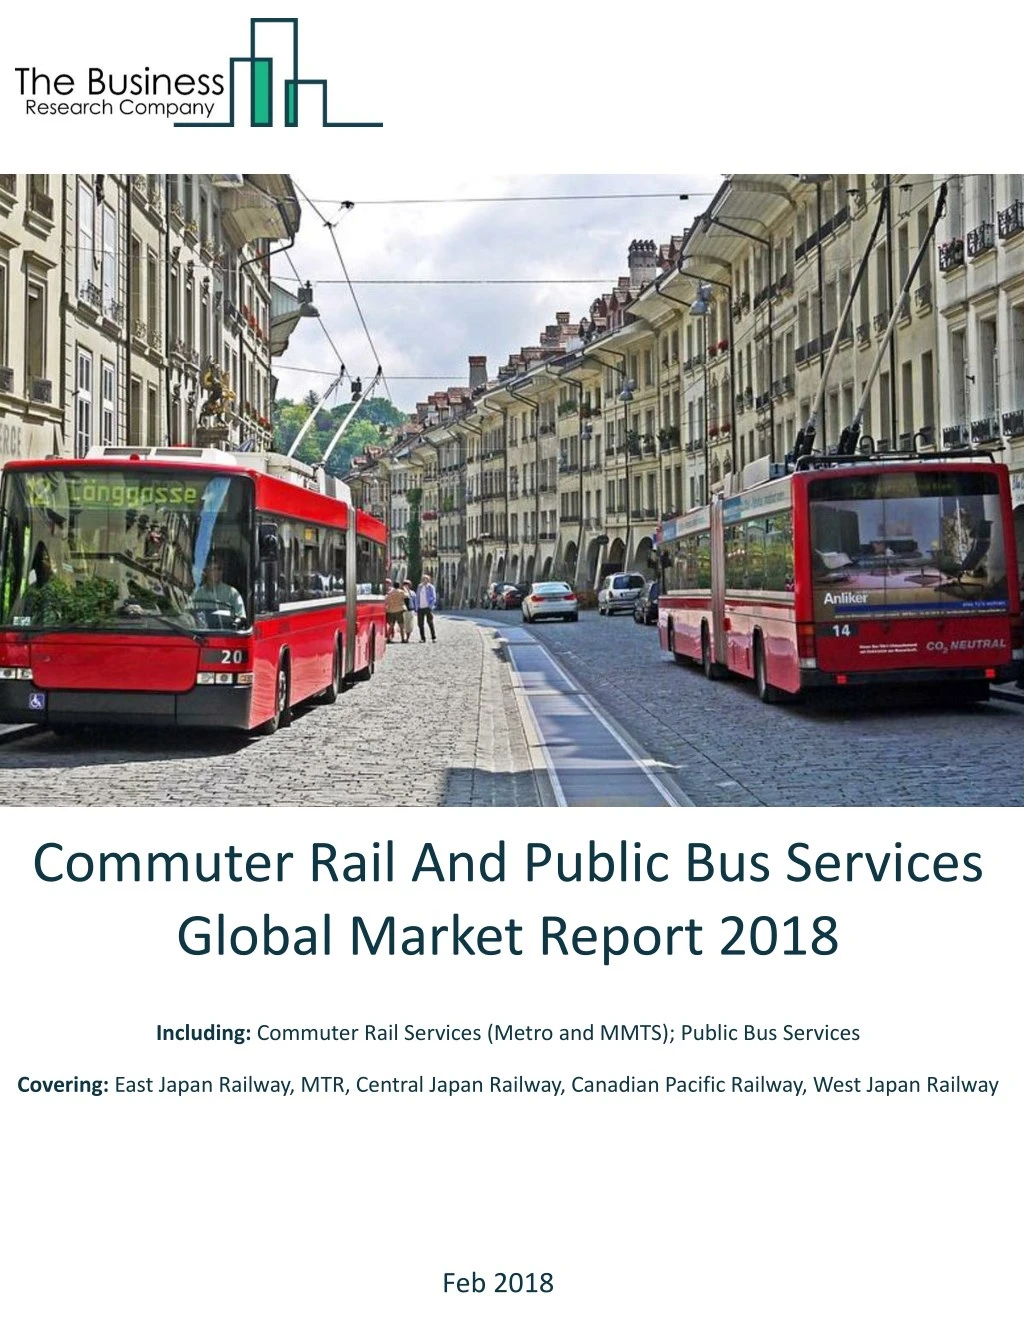 commuter rail and public bus services global